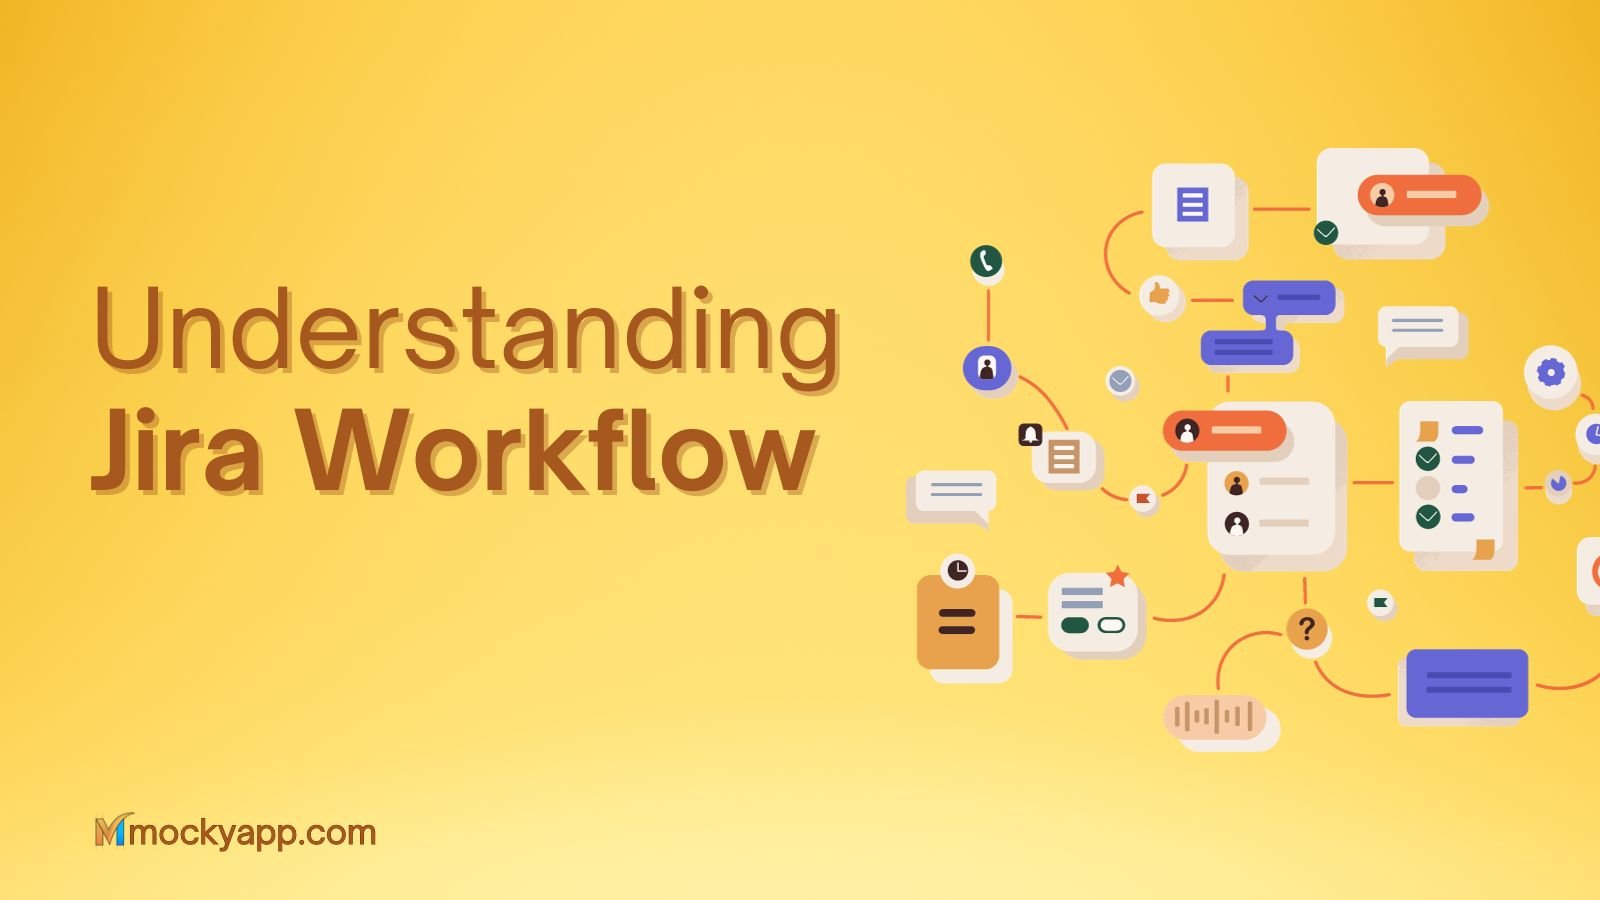 Understanding Jira Workflow: The complete guide to master it